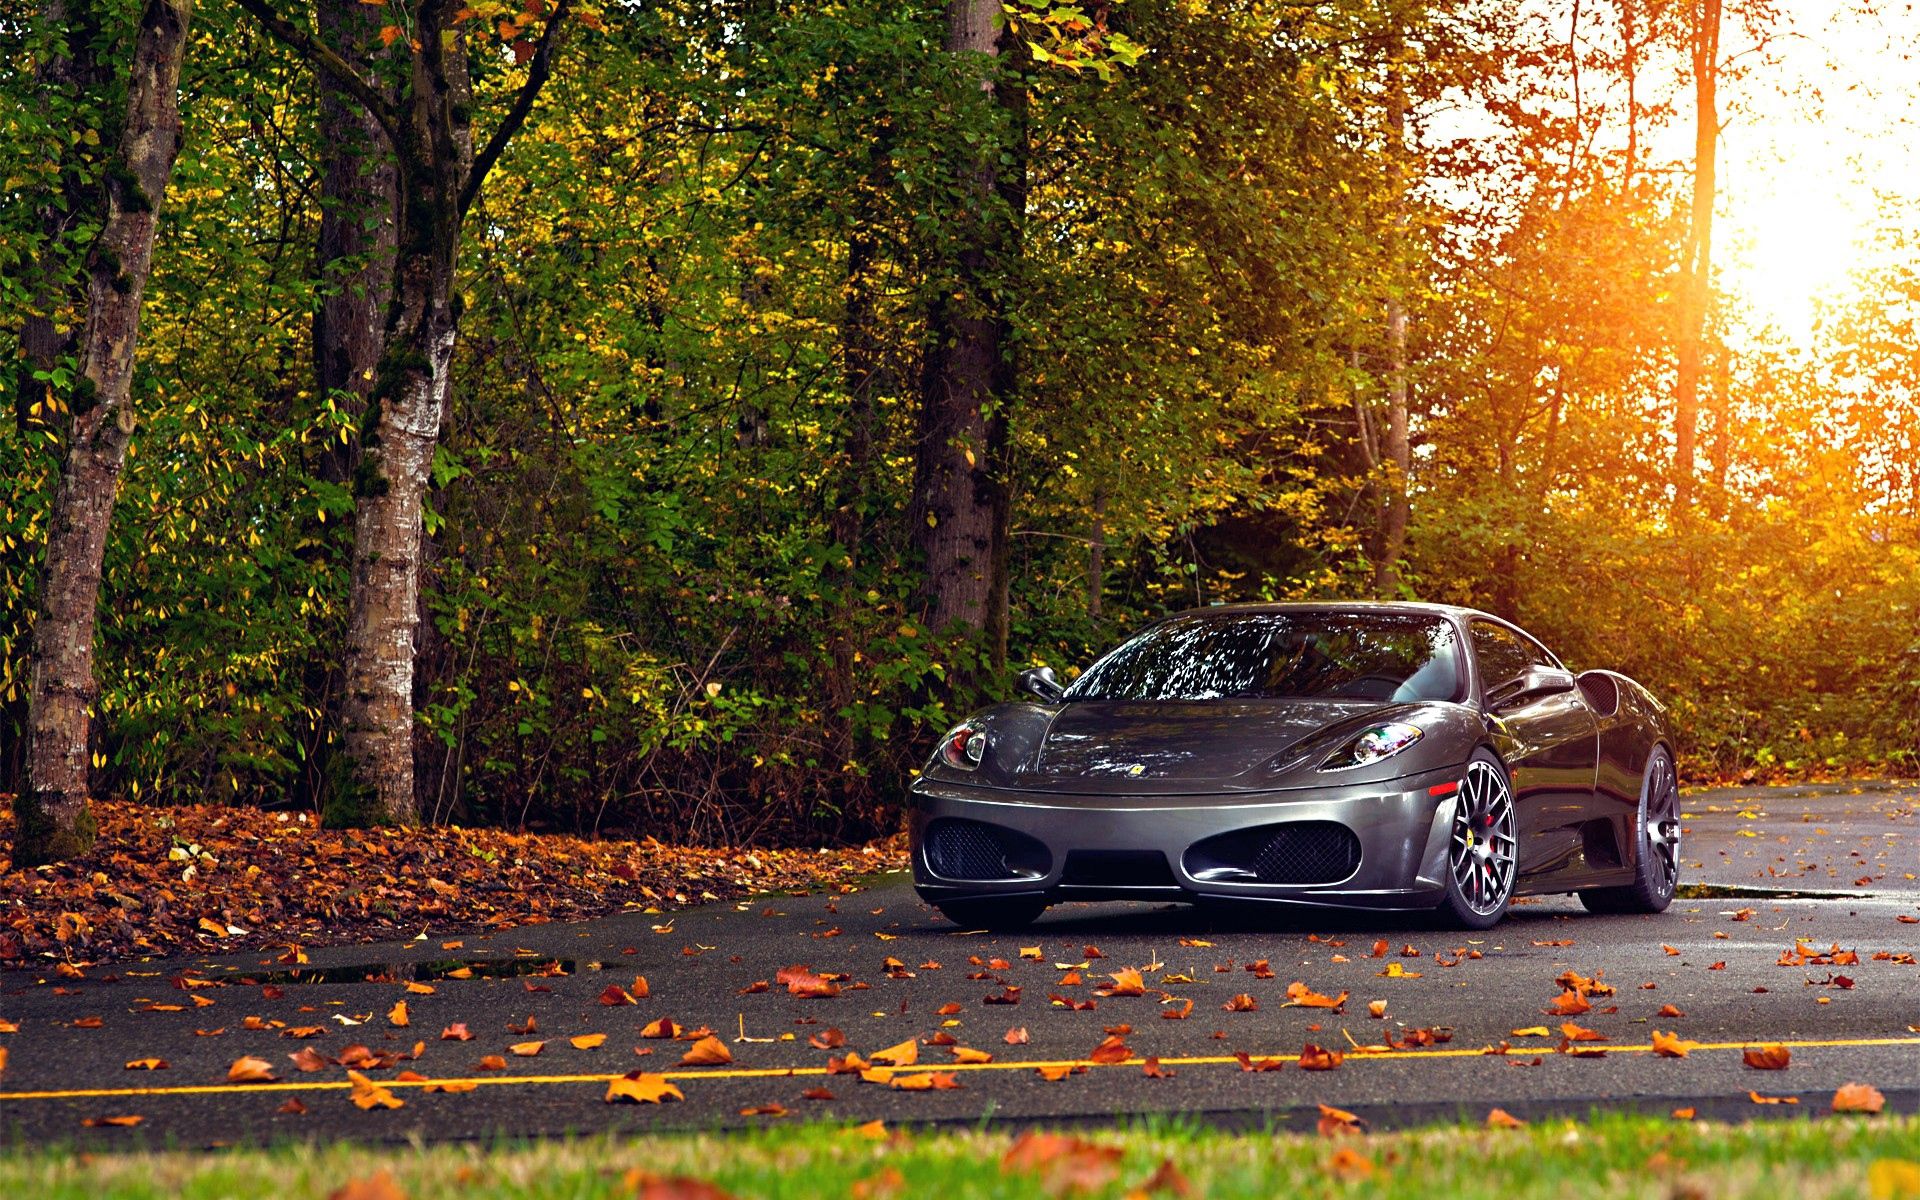 Best Scuderia wallpapers for phone screen